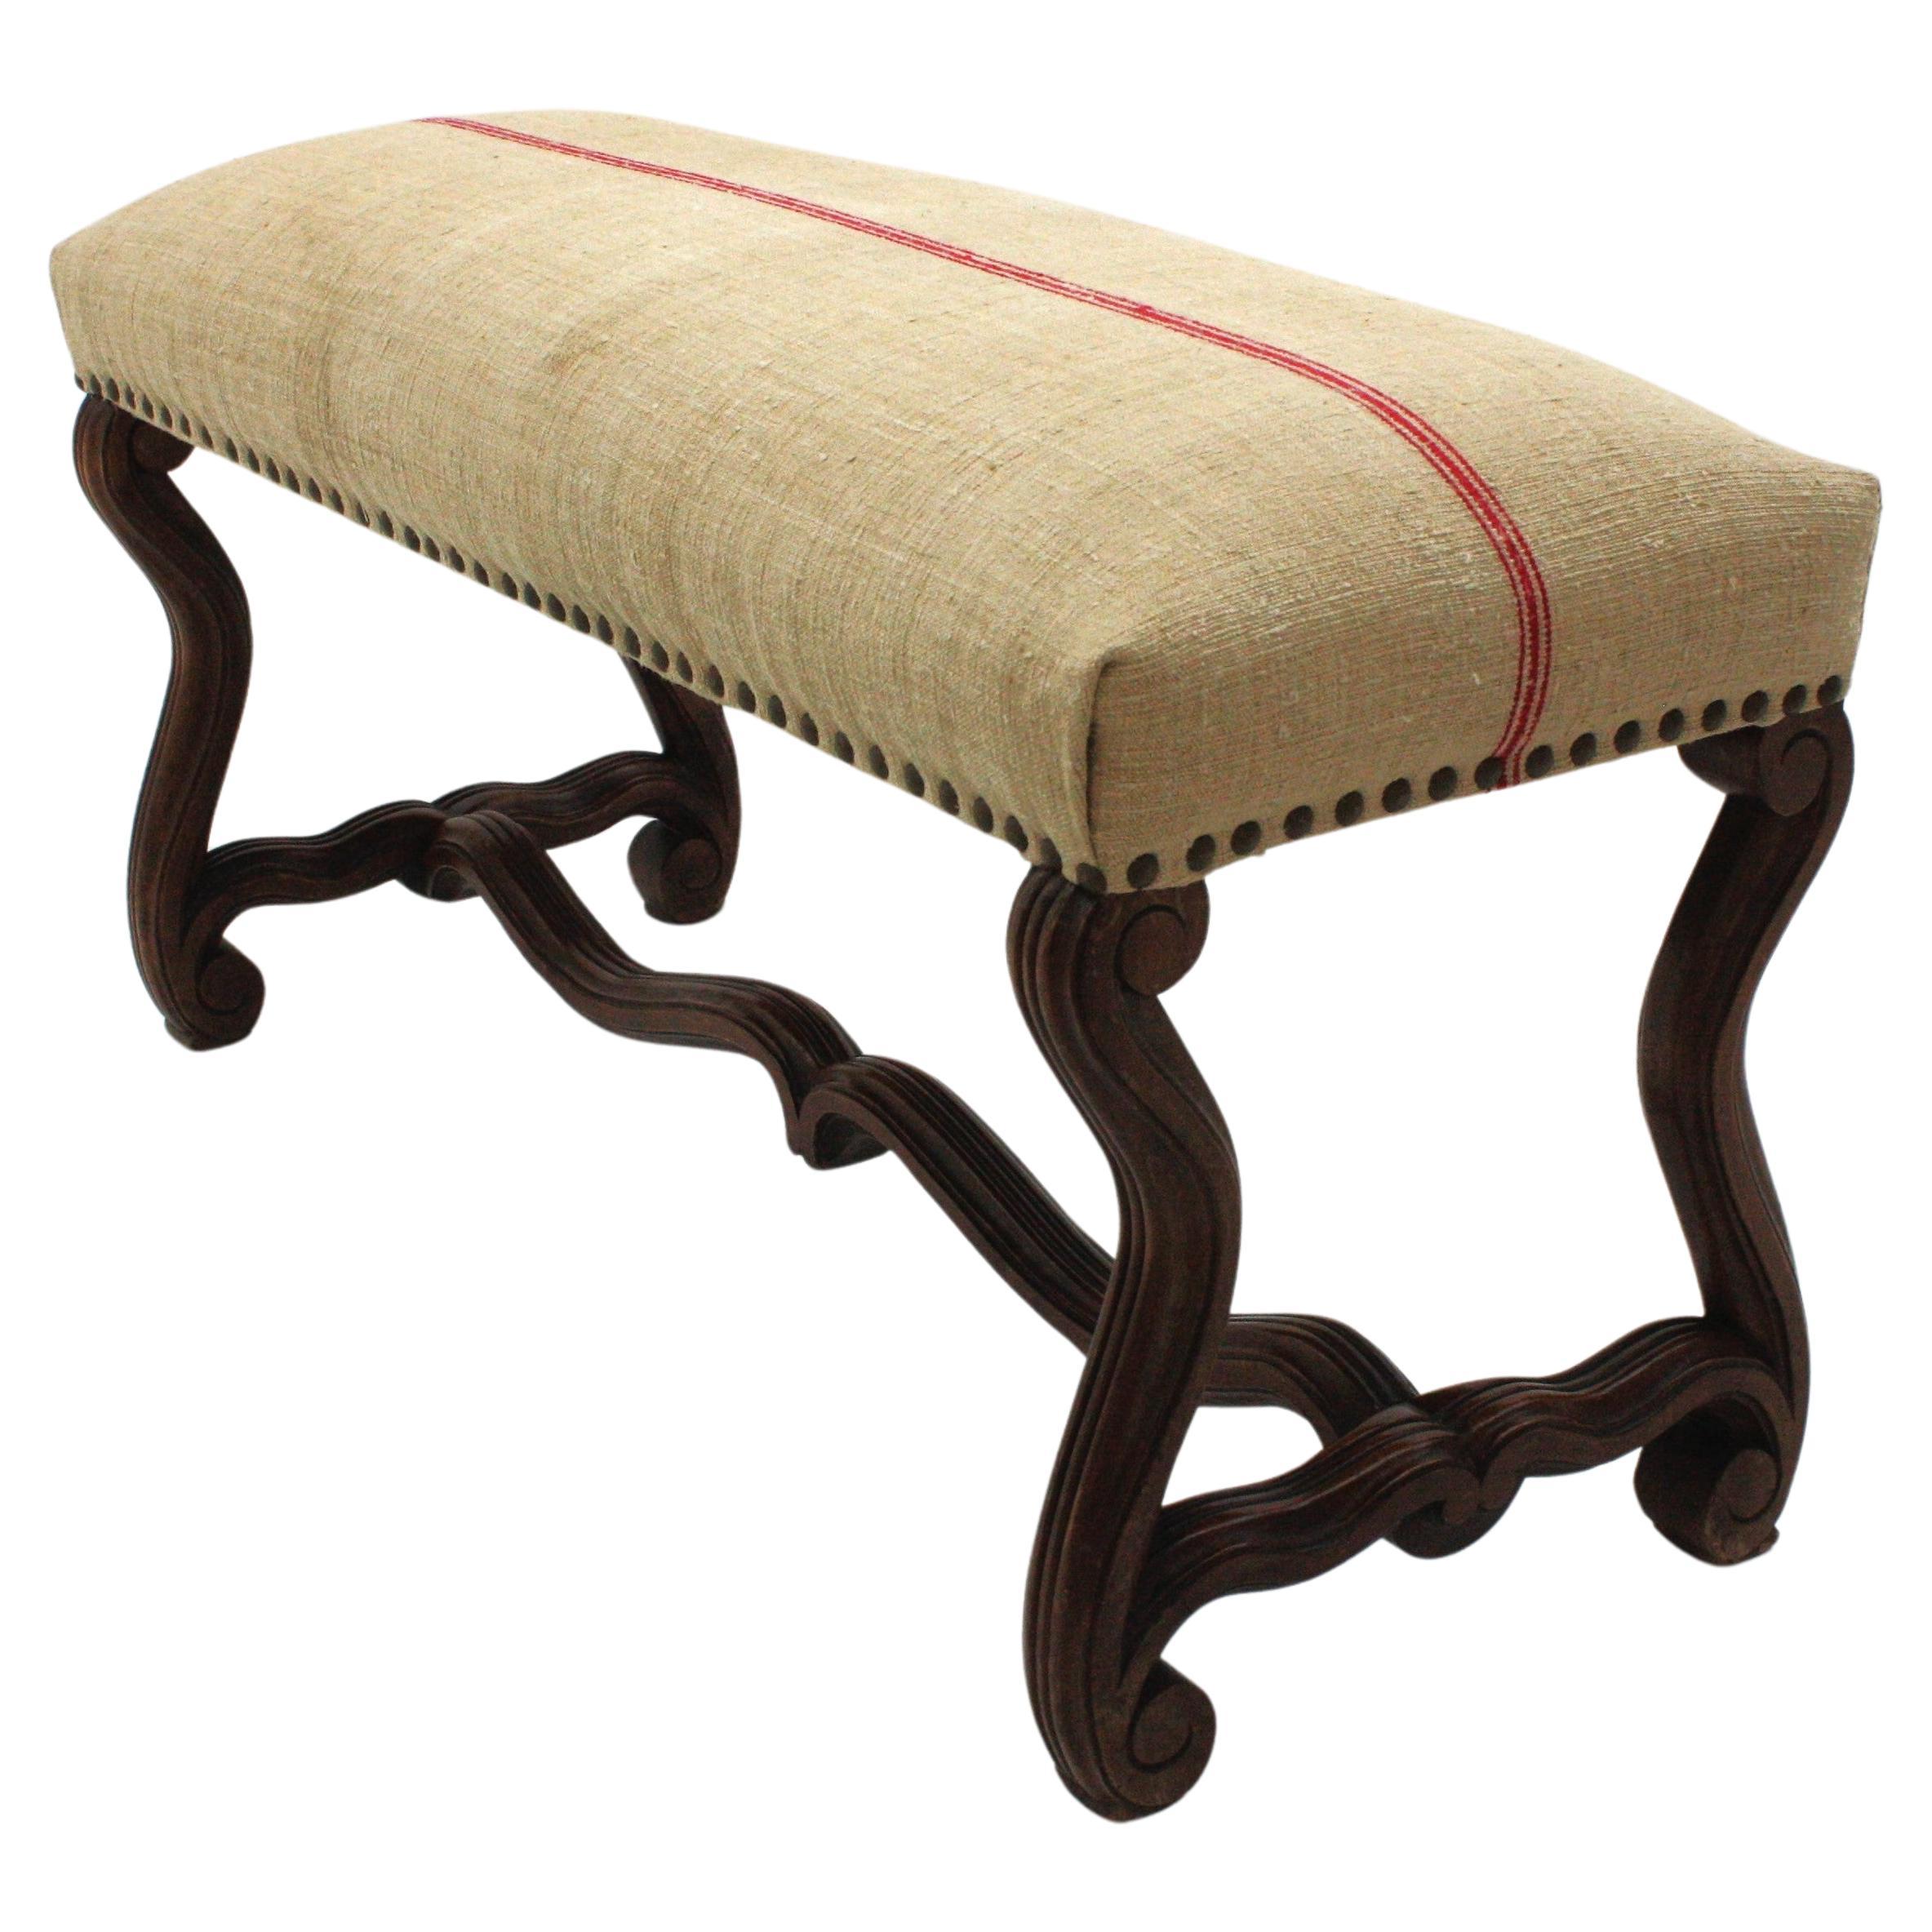 Hand-Carved Os de Mouton Louis XIV Walnut Bench with French Linen Upholstery For Sale